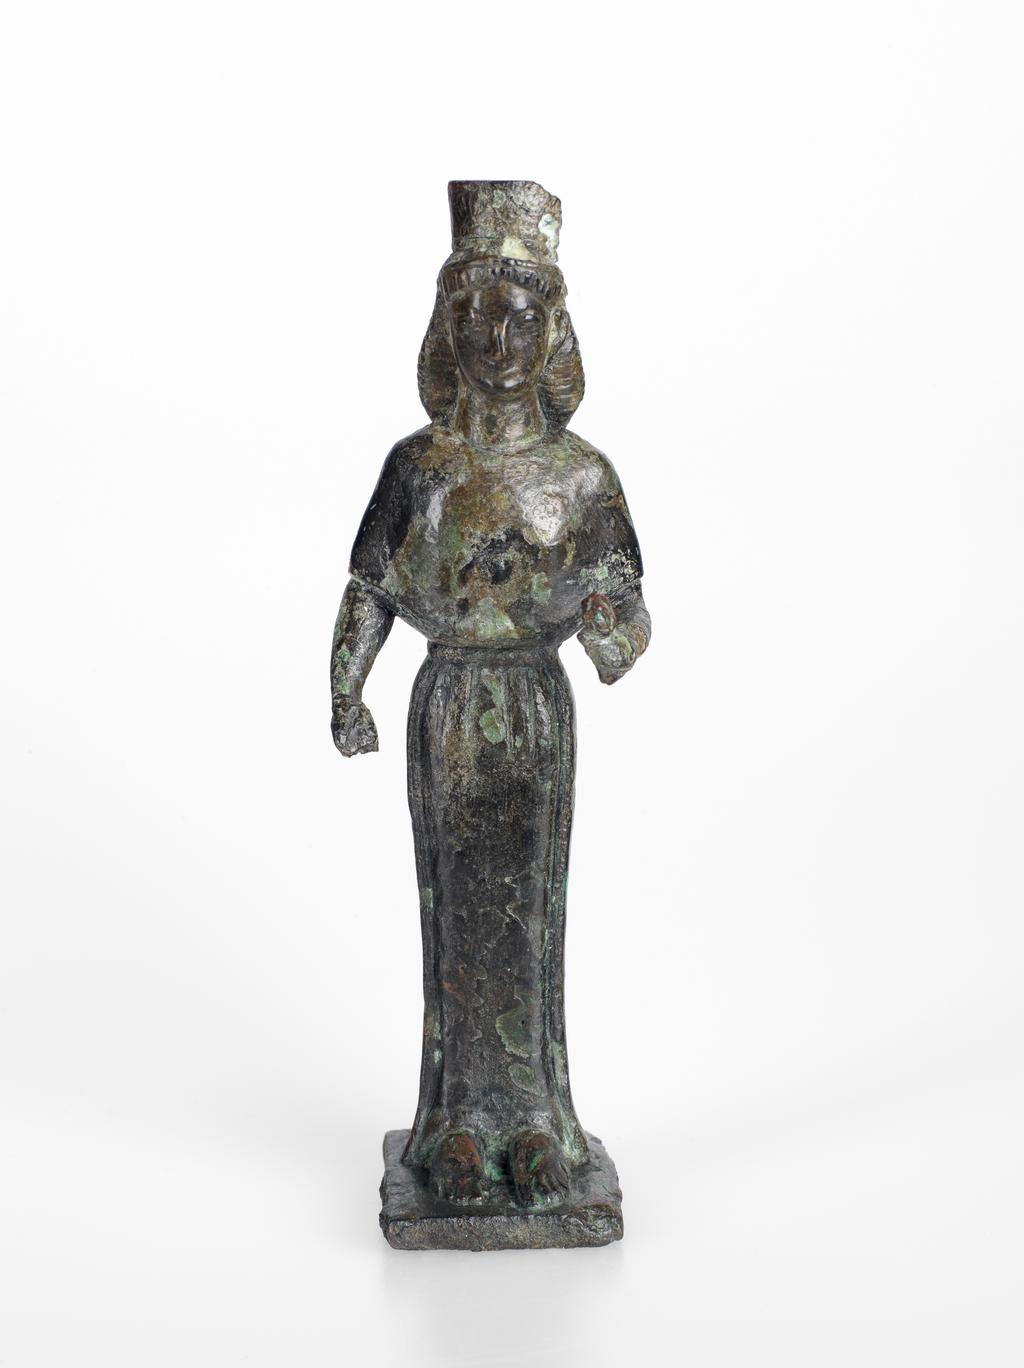 An image of Figure/Statuette of a woman, possibly Hera. Copper alloy, cast, height 0.135 m, width 0.041 m, depth (plinth) 0.034 m, 600-501 B.C. Production Place: Possibly Attica, Greece. Archaic Period.